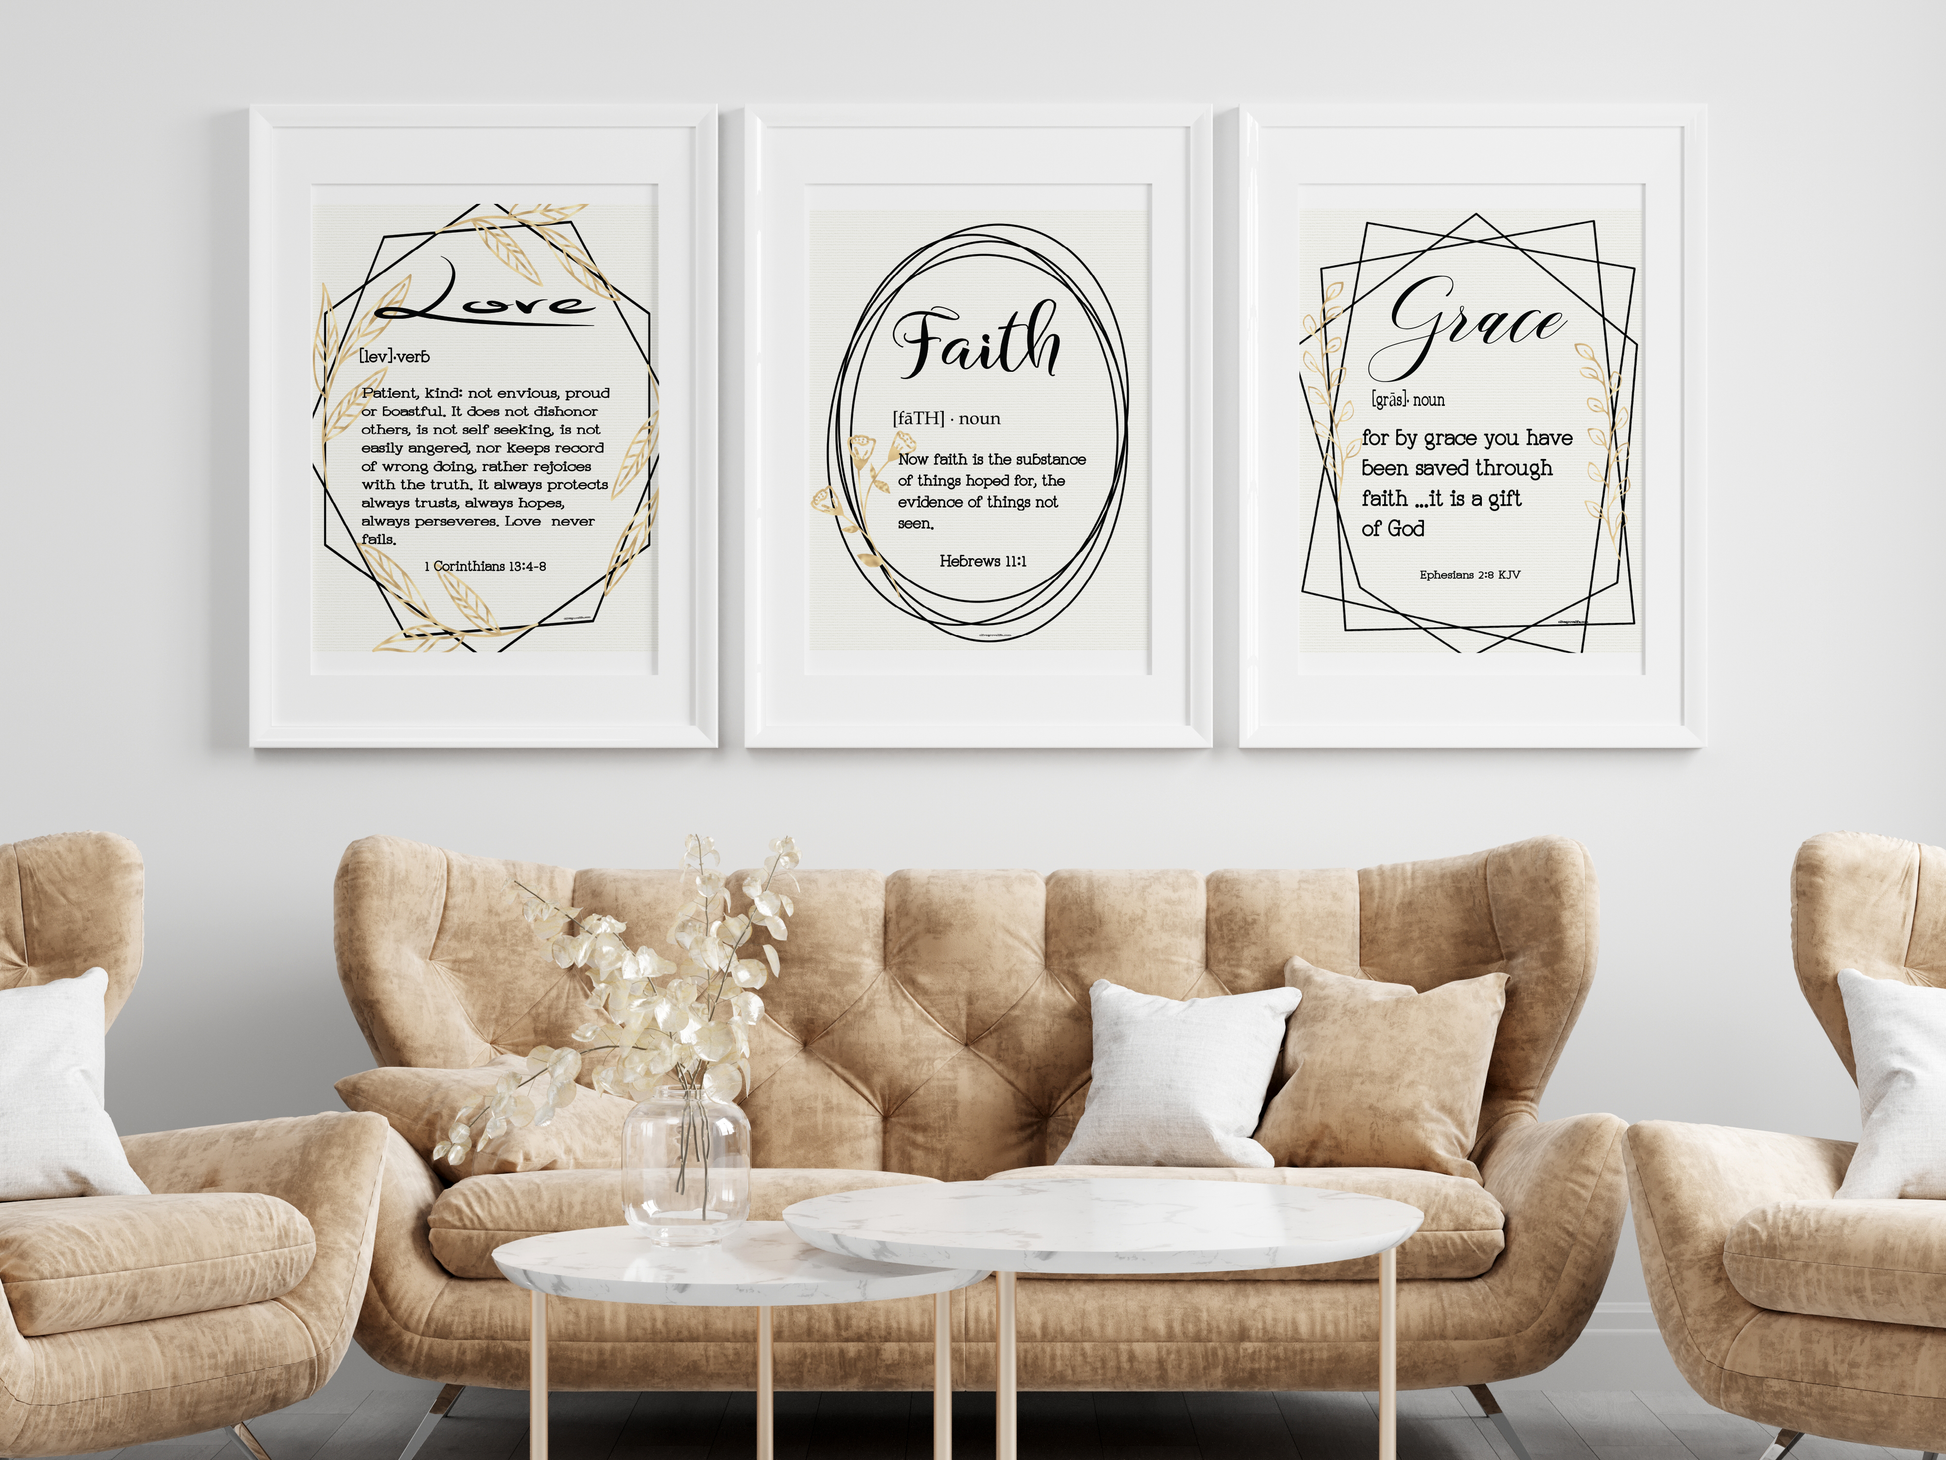 Love Defined 1 Corinthians 13:4-8 Art Print, Faith Defined Hebrews 11:1 Art Print, and Grace Defined Ephesians 2:8 Art Print hanging over brown couch